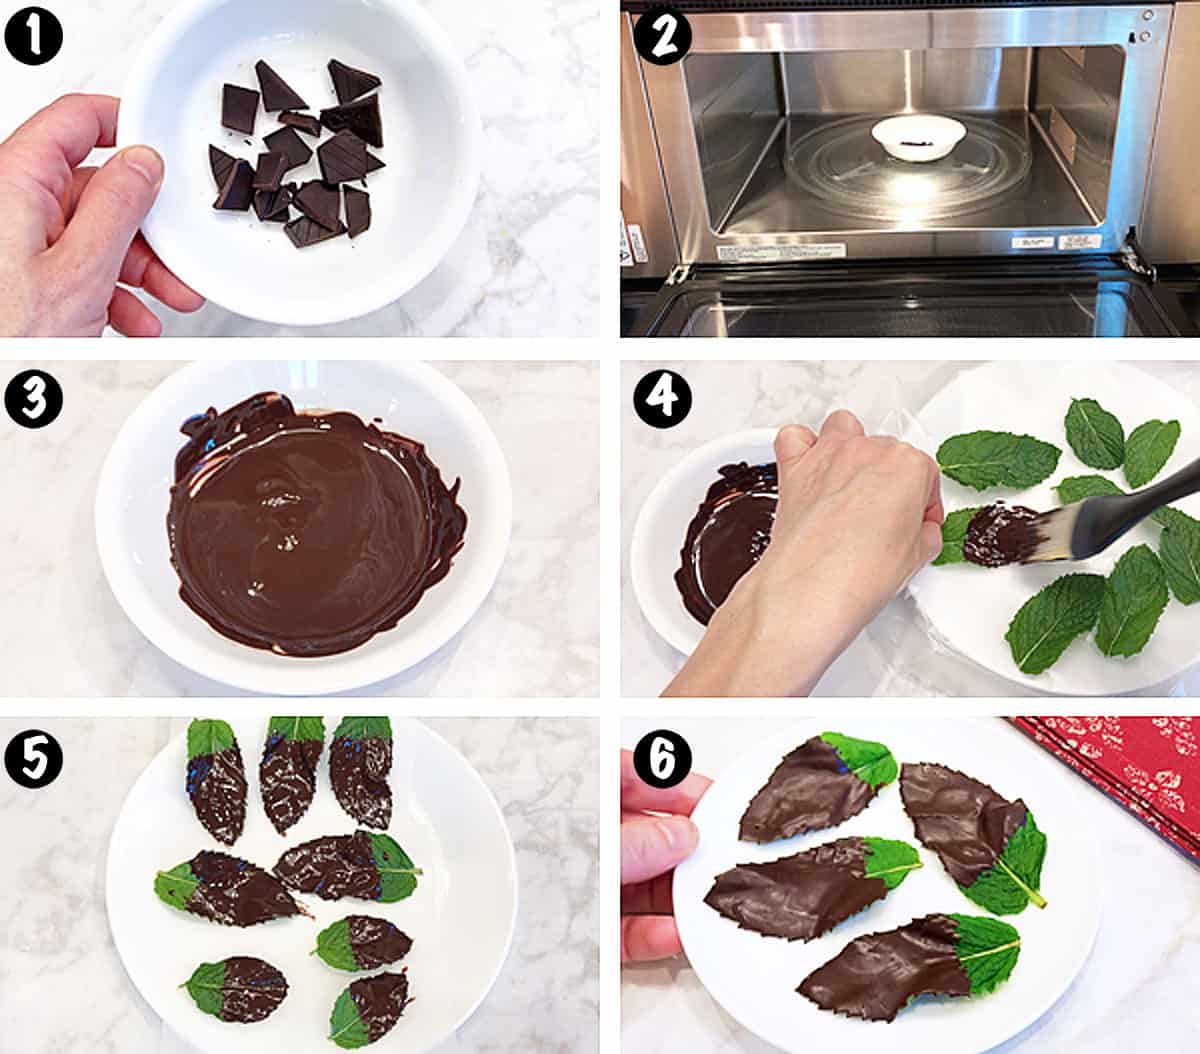 A photo collage showing the steps for making chocolate mint leaves.